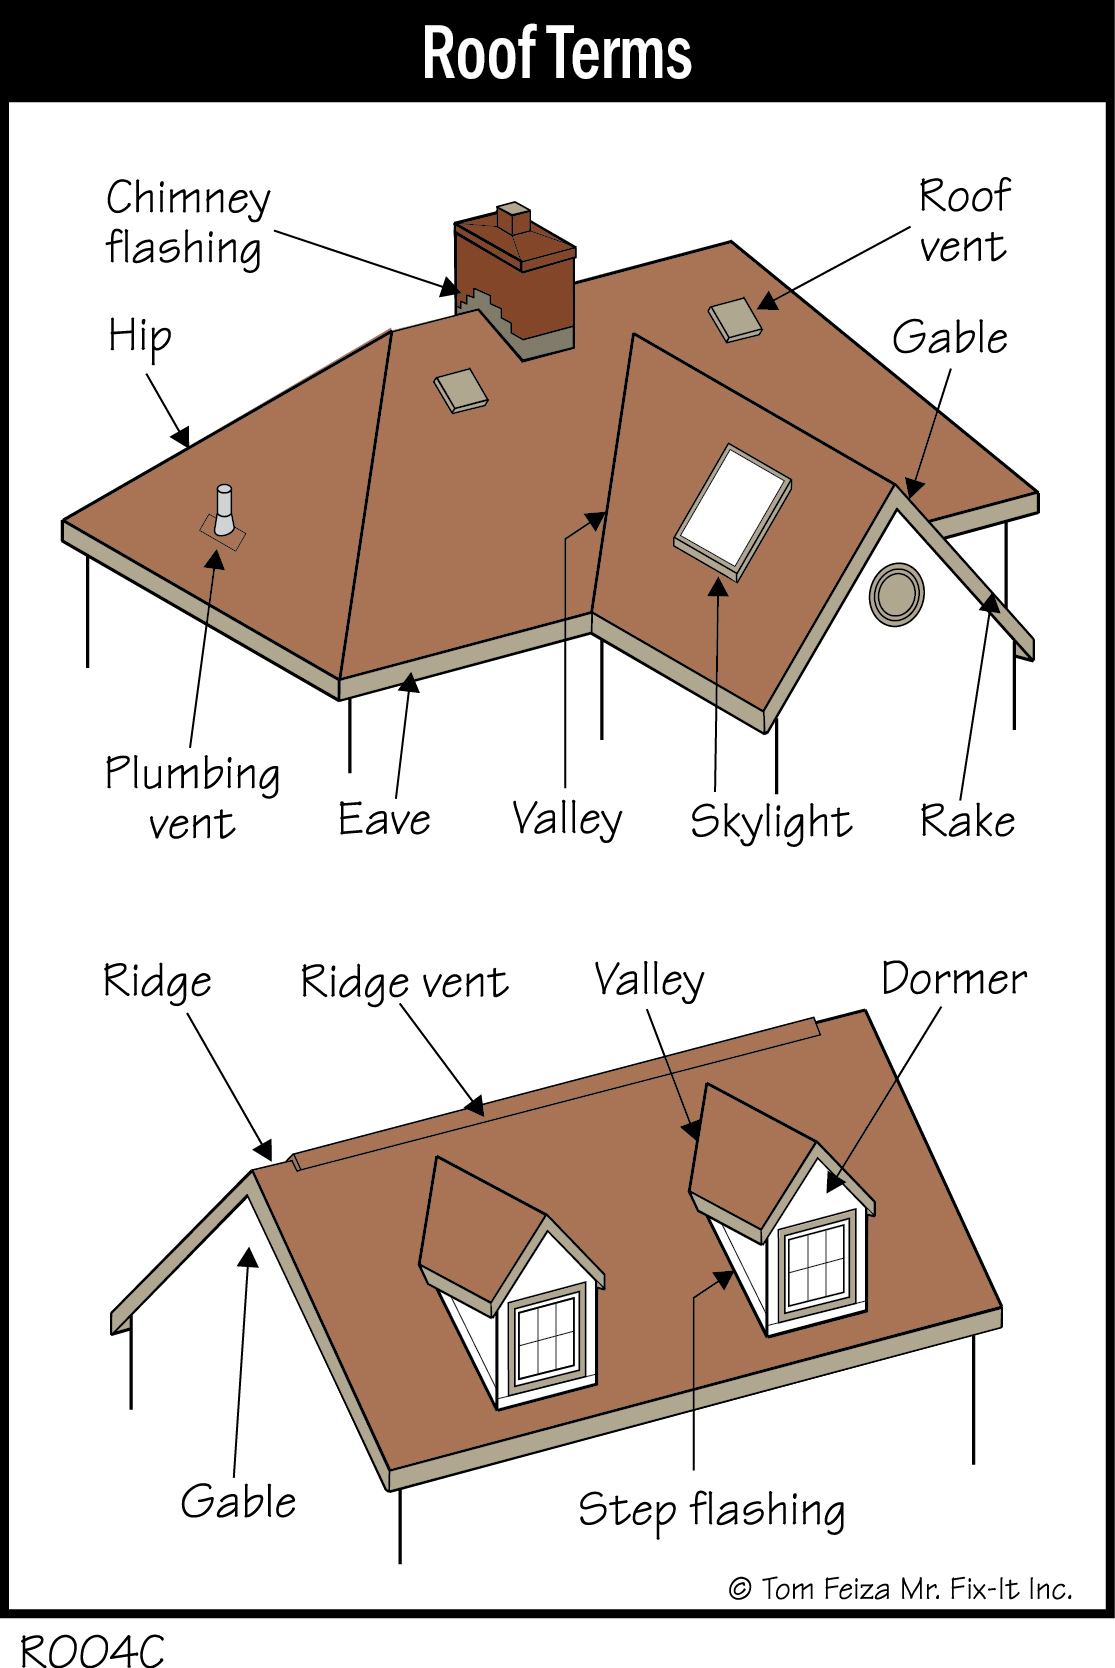 R004C - Roof Terms - Covered Bridge Professional Home Inspections